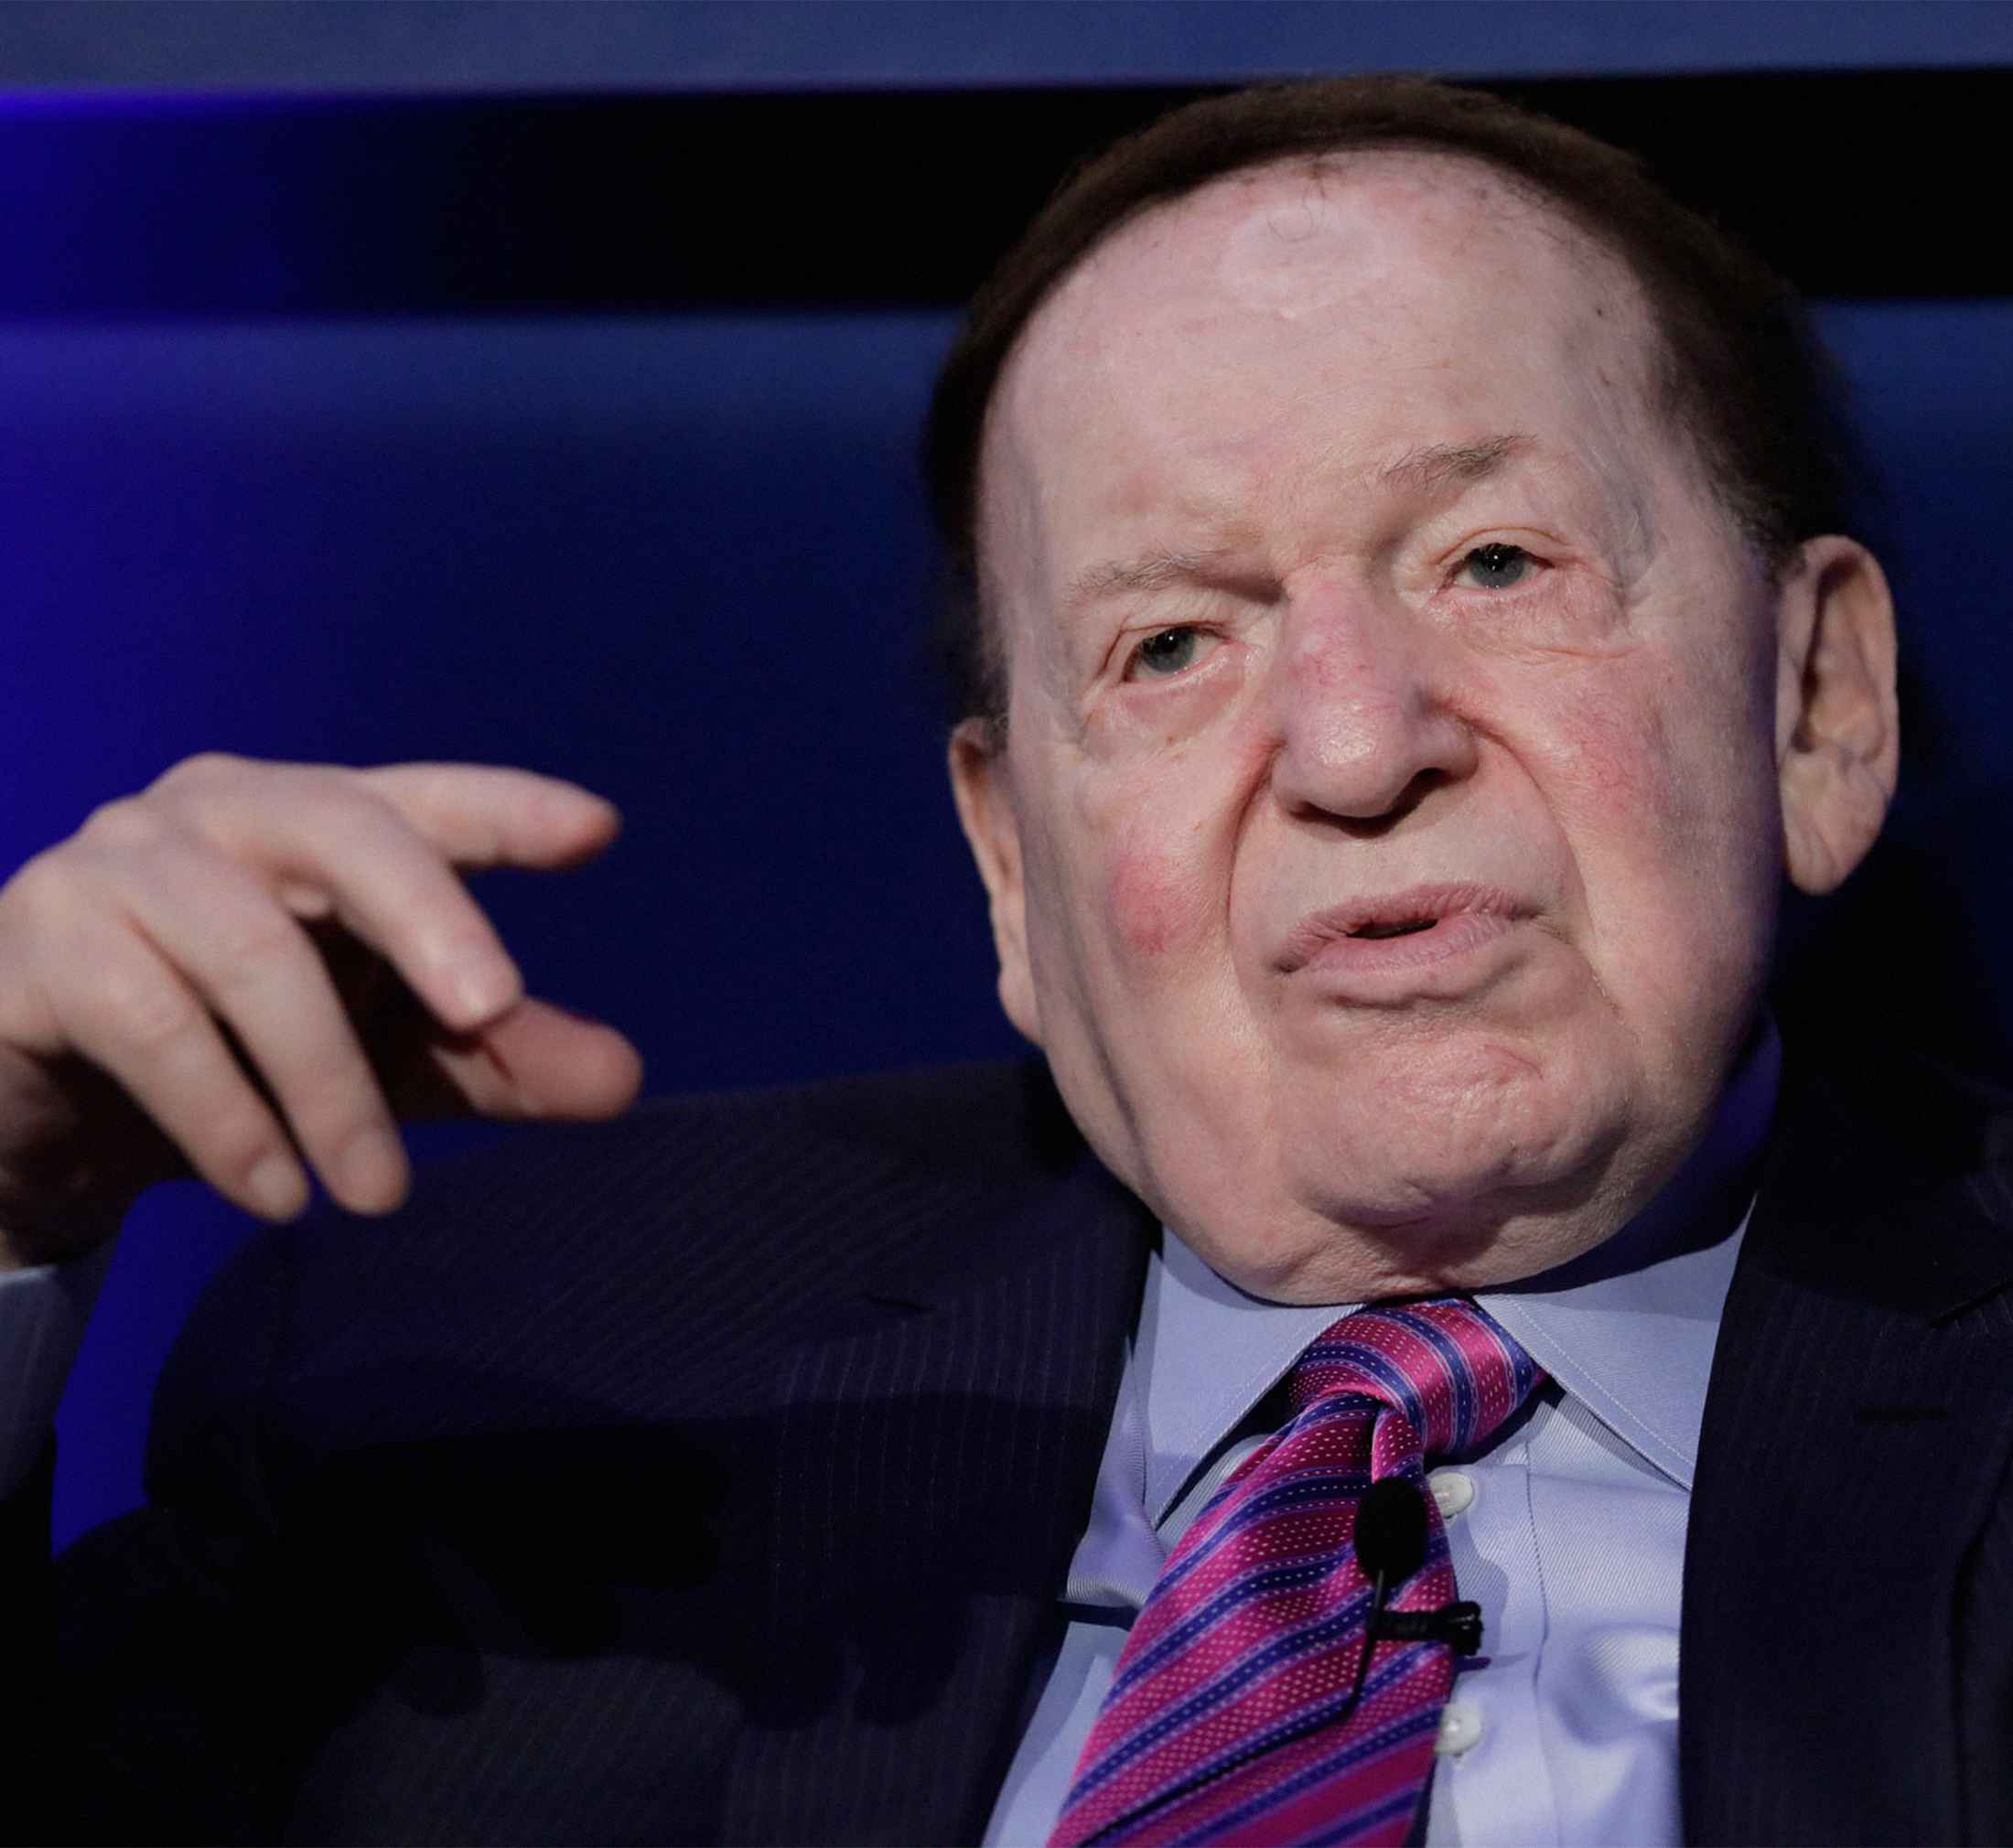 Las Vegas Sands Corp. Chairman and CEO Sheldon Adelson, shown at